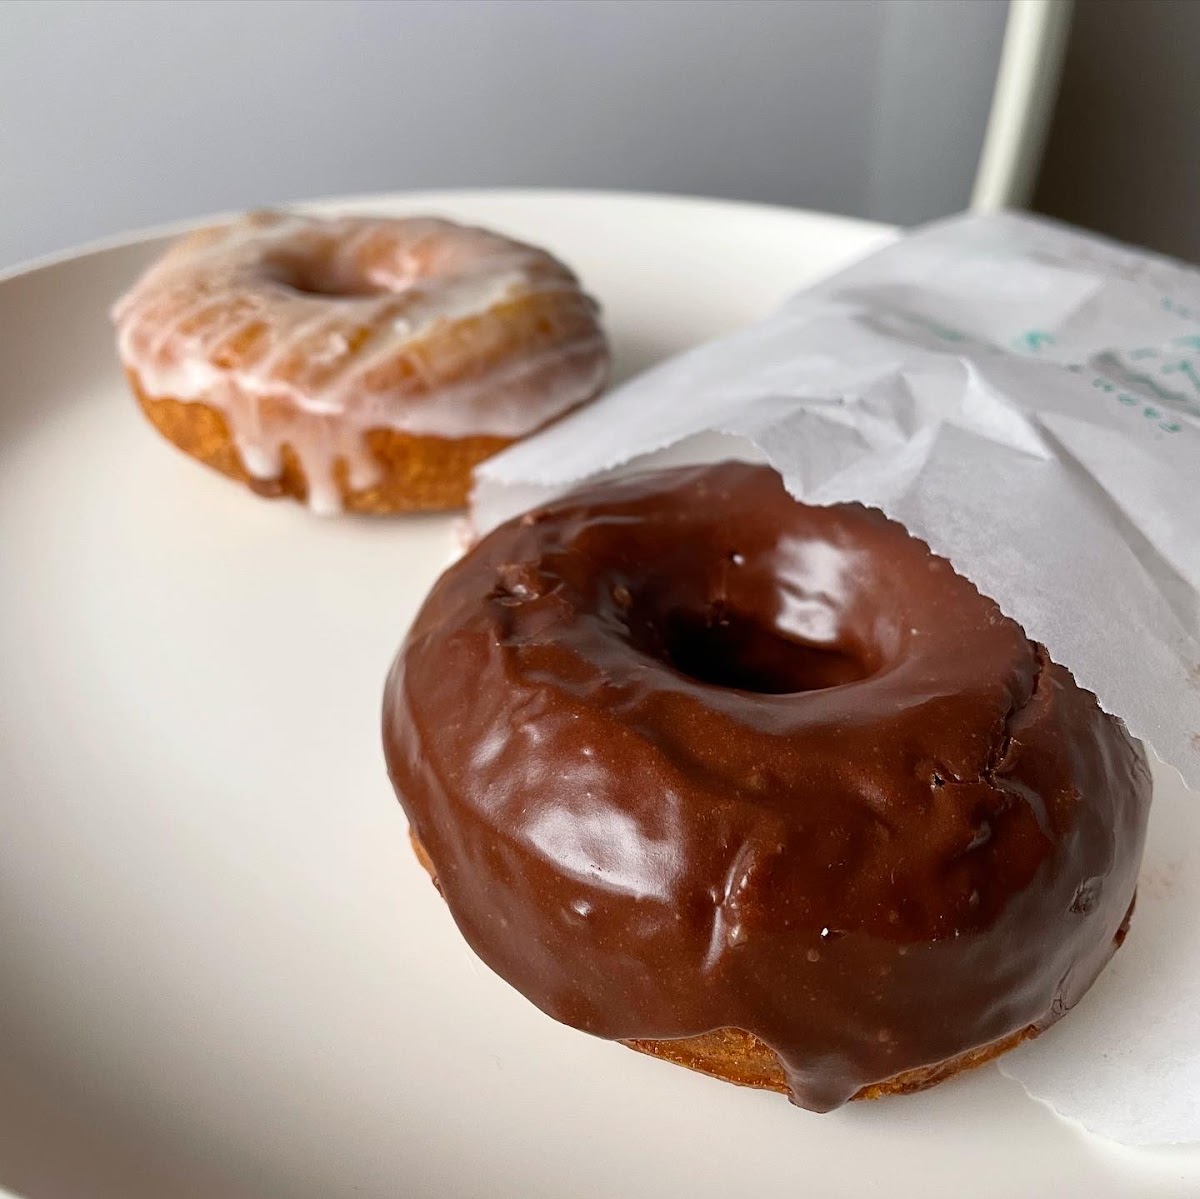 Gluten-Free at Downstate Donuts